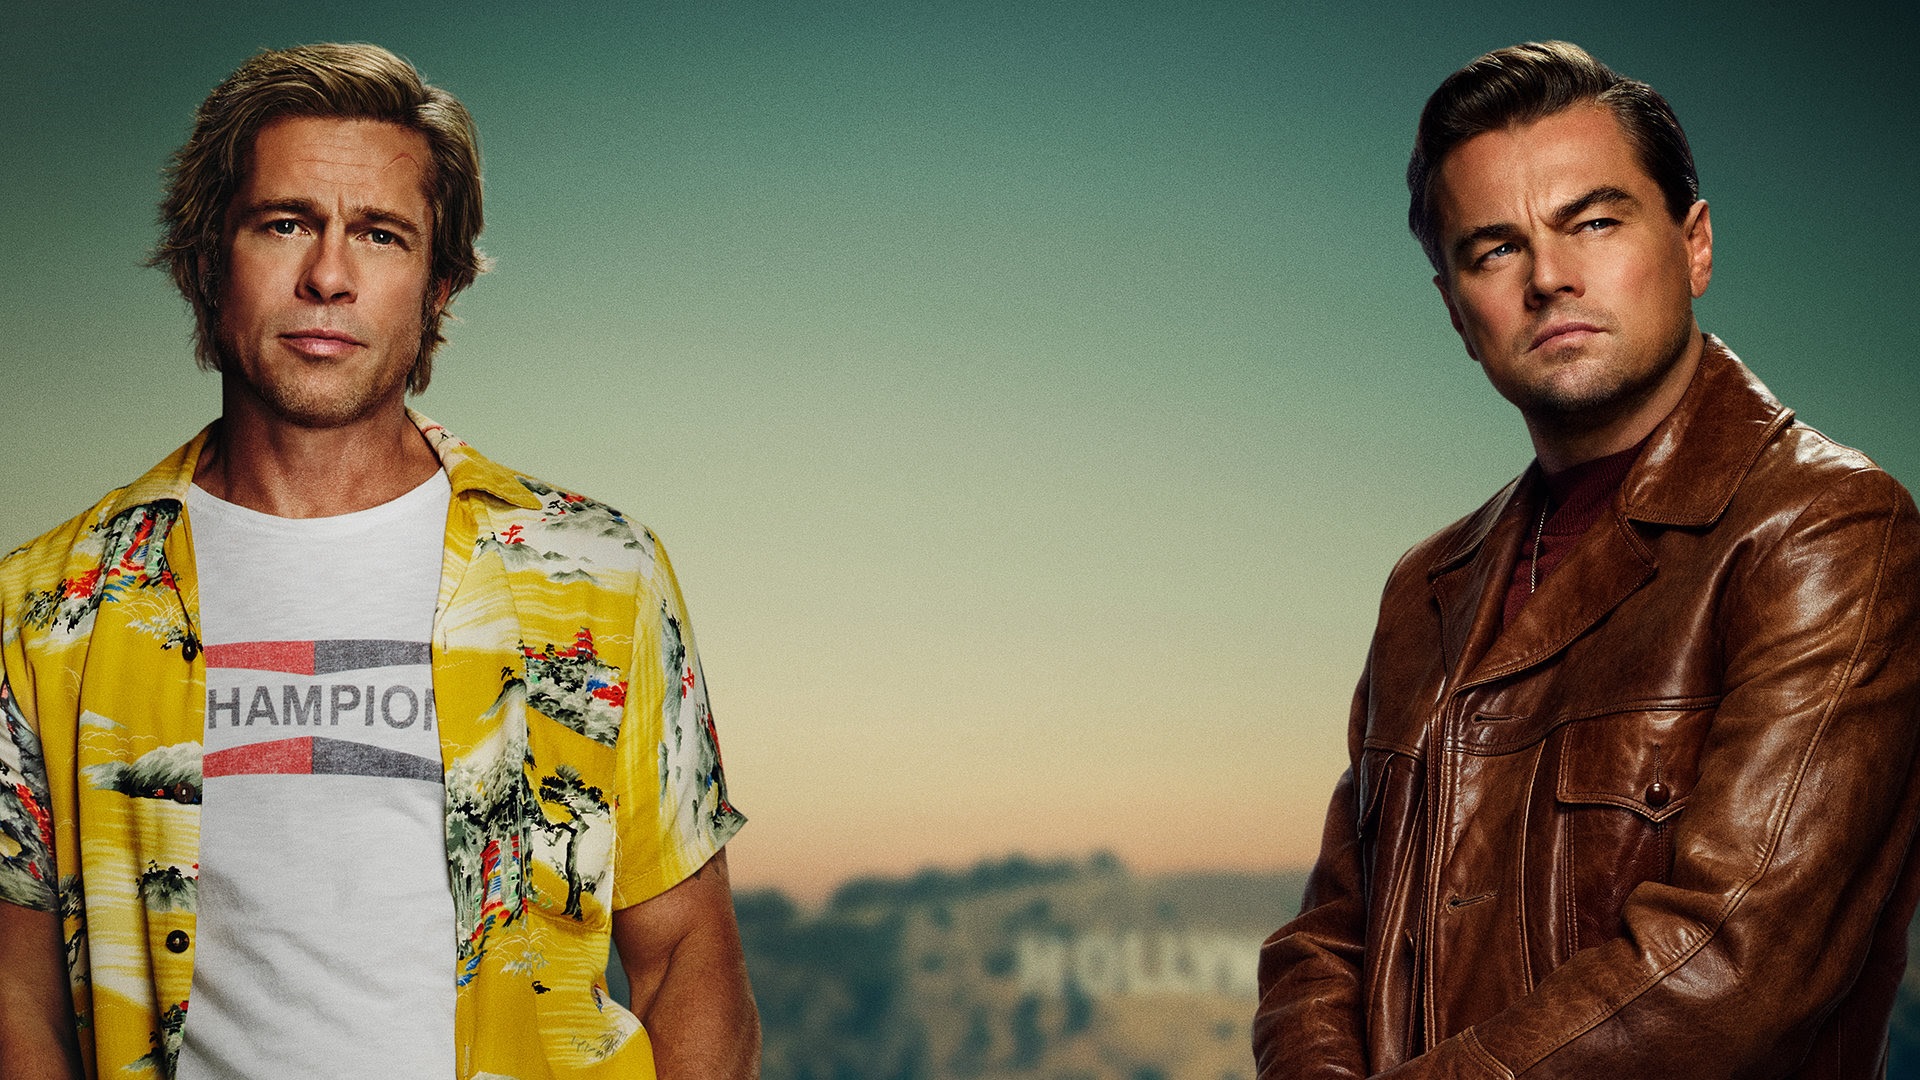 Brad Pitt Cliff Booth Leonardo Dicaprio Once Upon A Time In Hollywood Rick Dalton 1920x1080